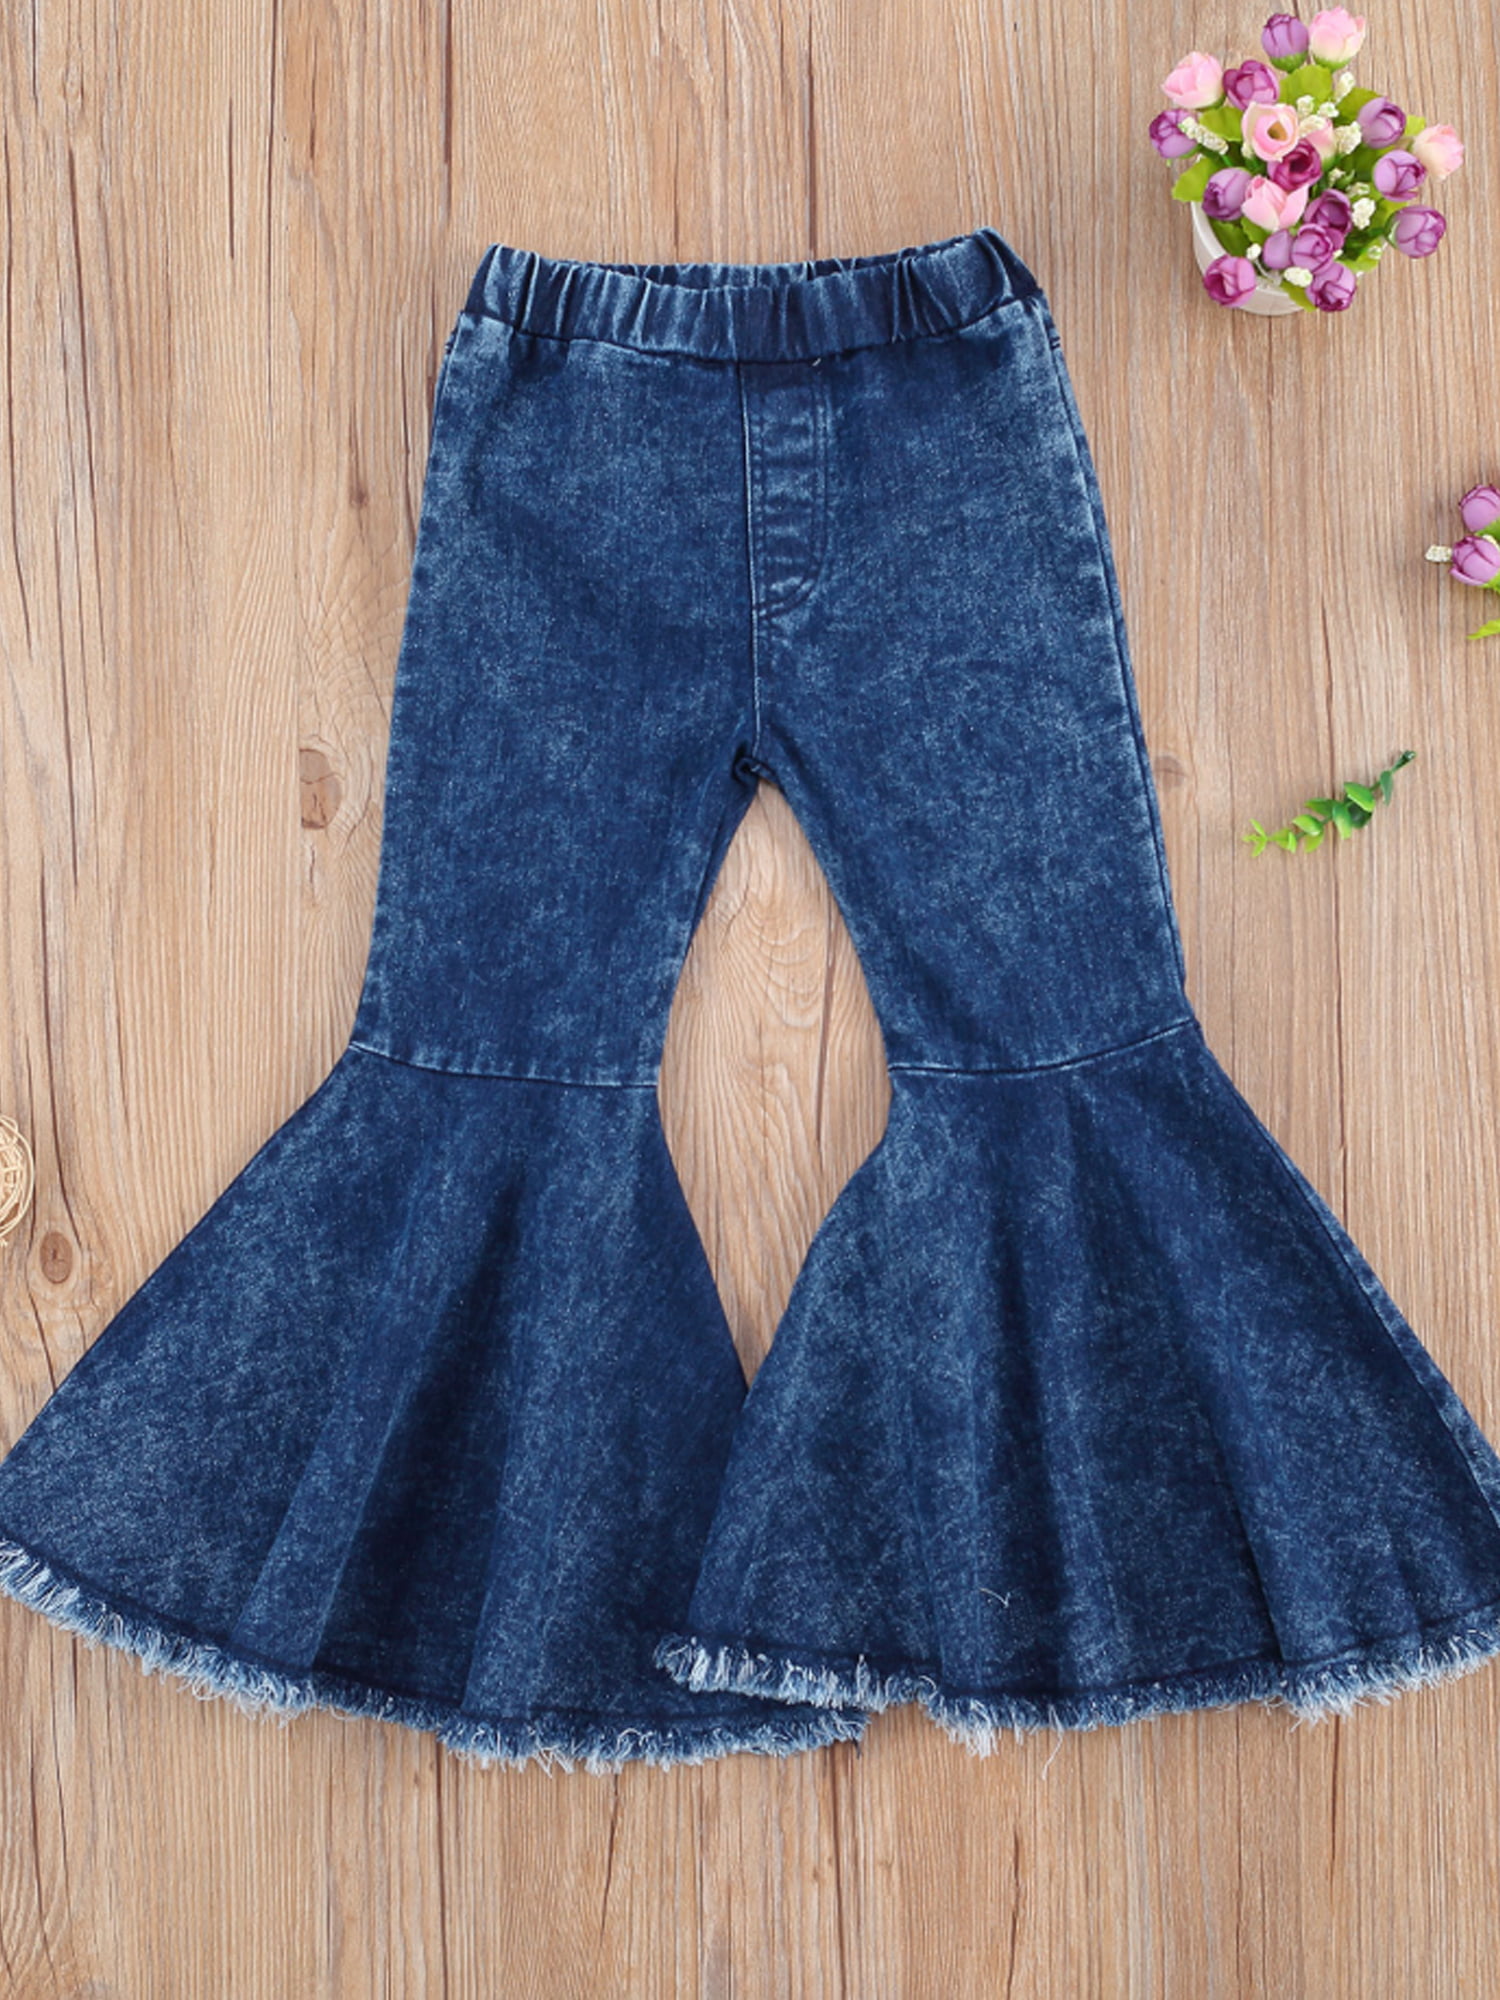 ICECTR Toddler Baby Girls Kid Flared Denim Pants Ruffled Wide Legs Ripped Jeans High Waist Bell Bottoms Casual Outfit 